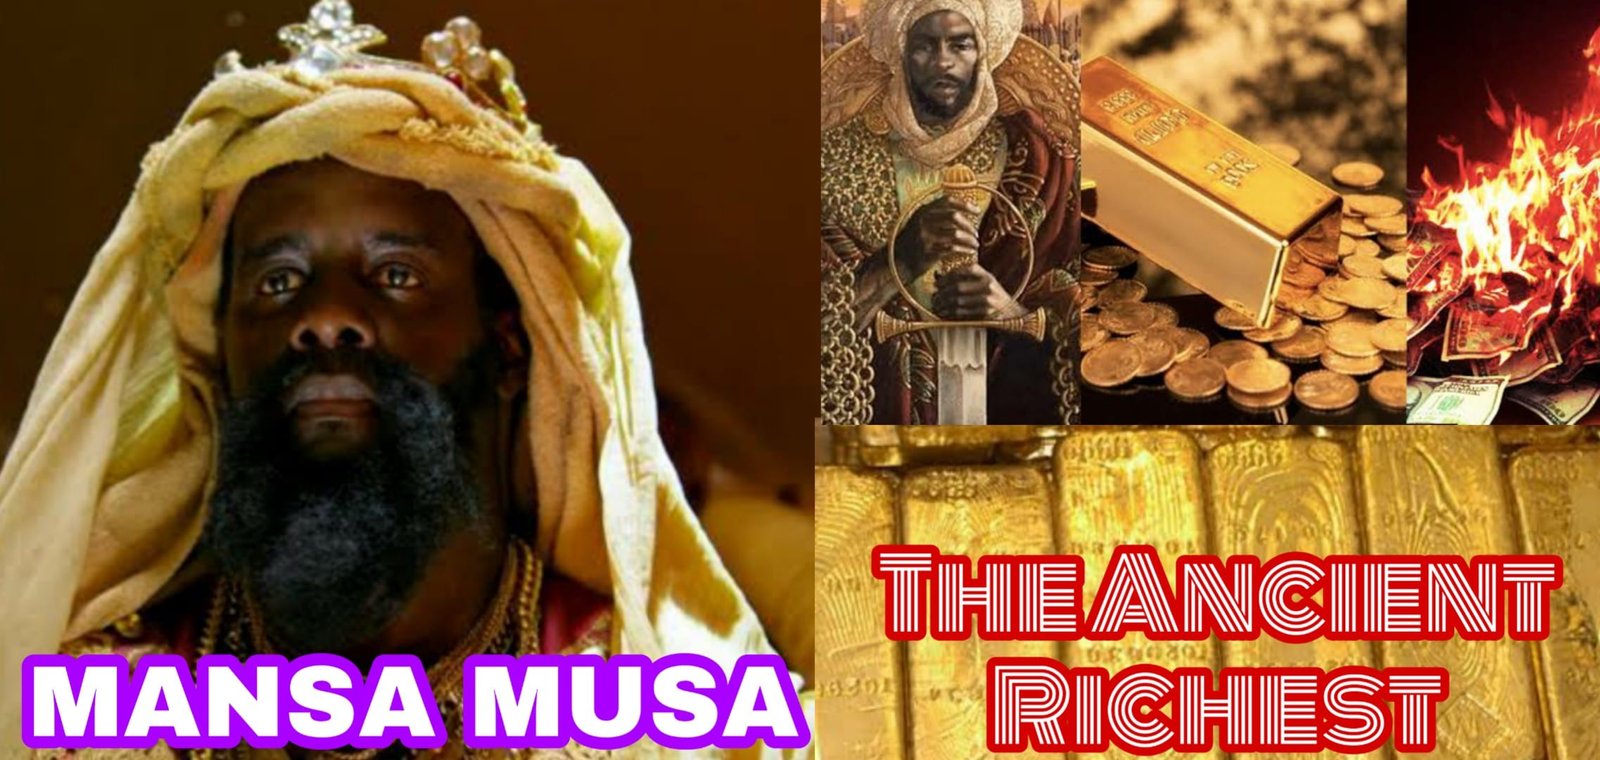 Mansa Musa Net Worth: What is the Total Net worth…